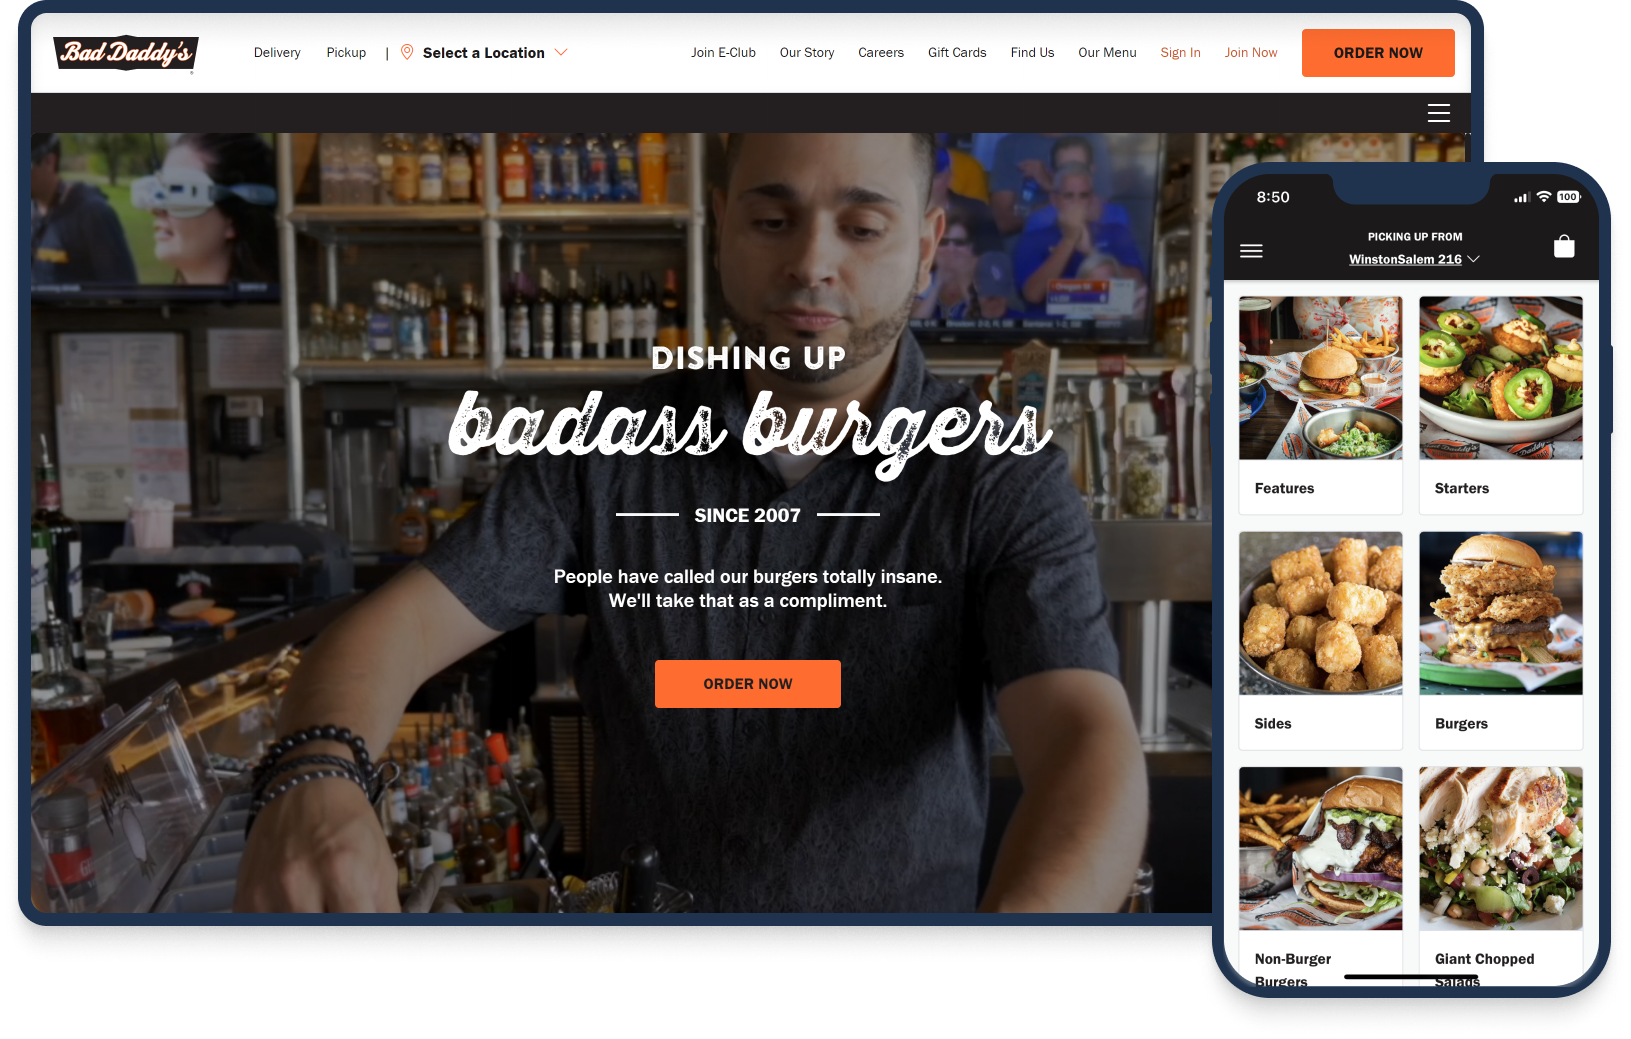 DineEngine and Bad Daddy's Burger Bar's online ordering website and app